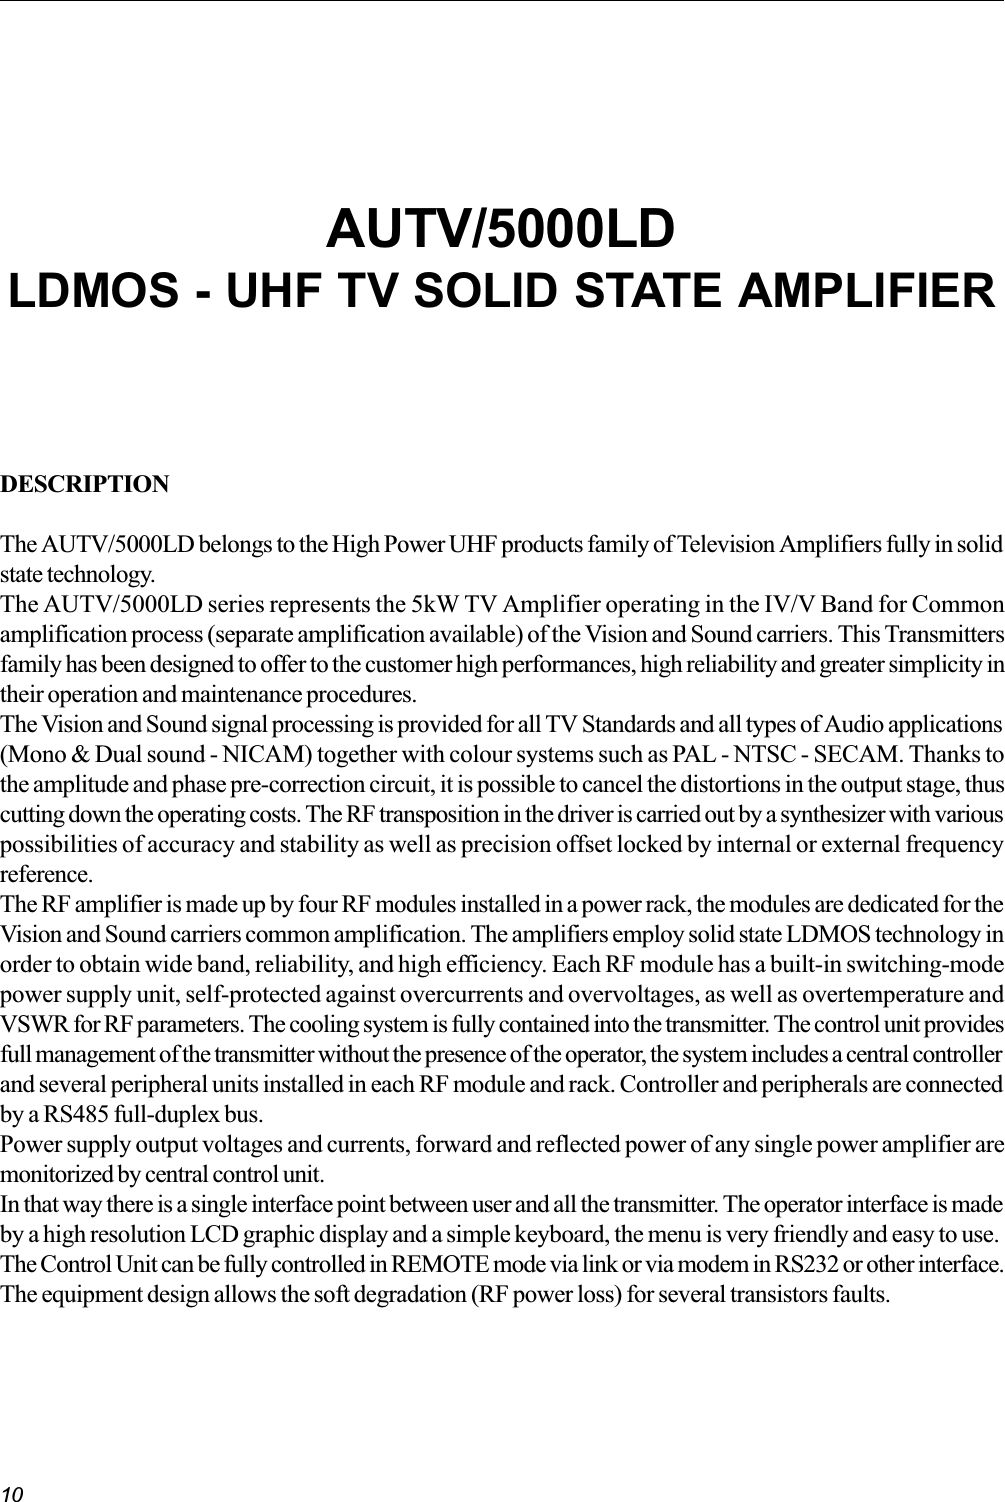 10DESCRIPTIONThe AUTV/5000LD belongs to the High Power UHF products family of Television Amplifiers fully in solidstate technology.The AUTV/5000LD series represents the 5kW TV Amplifier operating in the IV/V Band for Commonamplification process (separate amplification available) of the Vision and Sound carriers. This Transmittersfamily has been designed to offer to the customer high performances, high reliability and greater simplicity intheir operation and maintenance procedures.The Vision and Sound signal processing is provided for all TV Standards and all types of Audio applications(Mono &amp; Dual sound - NICAM) together with colour systems such as PAL - NTSC - SECAM. Thanks tothe amplitude and phase pre-correction circuit, it is possible to cancel the distortions in the output stage, thuscutting down the operating costs. The RF transposition in the driver is carried out by a synthesizer with variouspossibilities of accuracy and stability as well as precision offset locked by internal or external frequencyreference.The RF amplifier is made up by four RF modules installed in a power rack, the modules are dedicated for theVision and Sound carriers common amplification. The amplifiers employ solid state LDMOS technology inorder to obtain wide band, reliability, and high efficiency. Each RF module has a built-in switching-modepower supply unit, self-protected against overcurrents and overvoltages, as well as overtemperature andVSWR for RF parameters. The cooling system is fully contained into the transmitter. The control unit providesfull management of the transmitter without the presence of the operator, the system includes a central controllerand several peripheral units installed in each RF module and rack. Controller and peripherals are connectedby a RS485 full-duplex bus.Power supply output voltages and currents, forward and reflected power of any single power amplifier aremonitorized by central control unit.In that way there is a single interface point between user and all the transmitter. The operator interface is madeby a high resolution LCD graphic display and a simple keyboard, the menu is very friendly and easy to use.The Control Unit can be fully controlled in REMOTE mode via link or via modem in RS232 or other interface.The equipment design allows the soft degradation (RF power loss) for several transistors faults.AUTV/5000LDLDMOS - UHF TV SOLID STATE AMPLIFIER